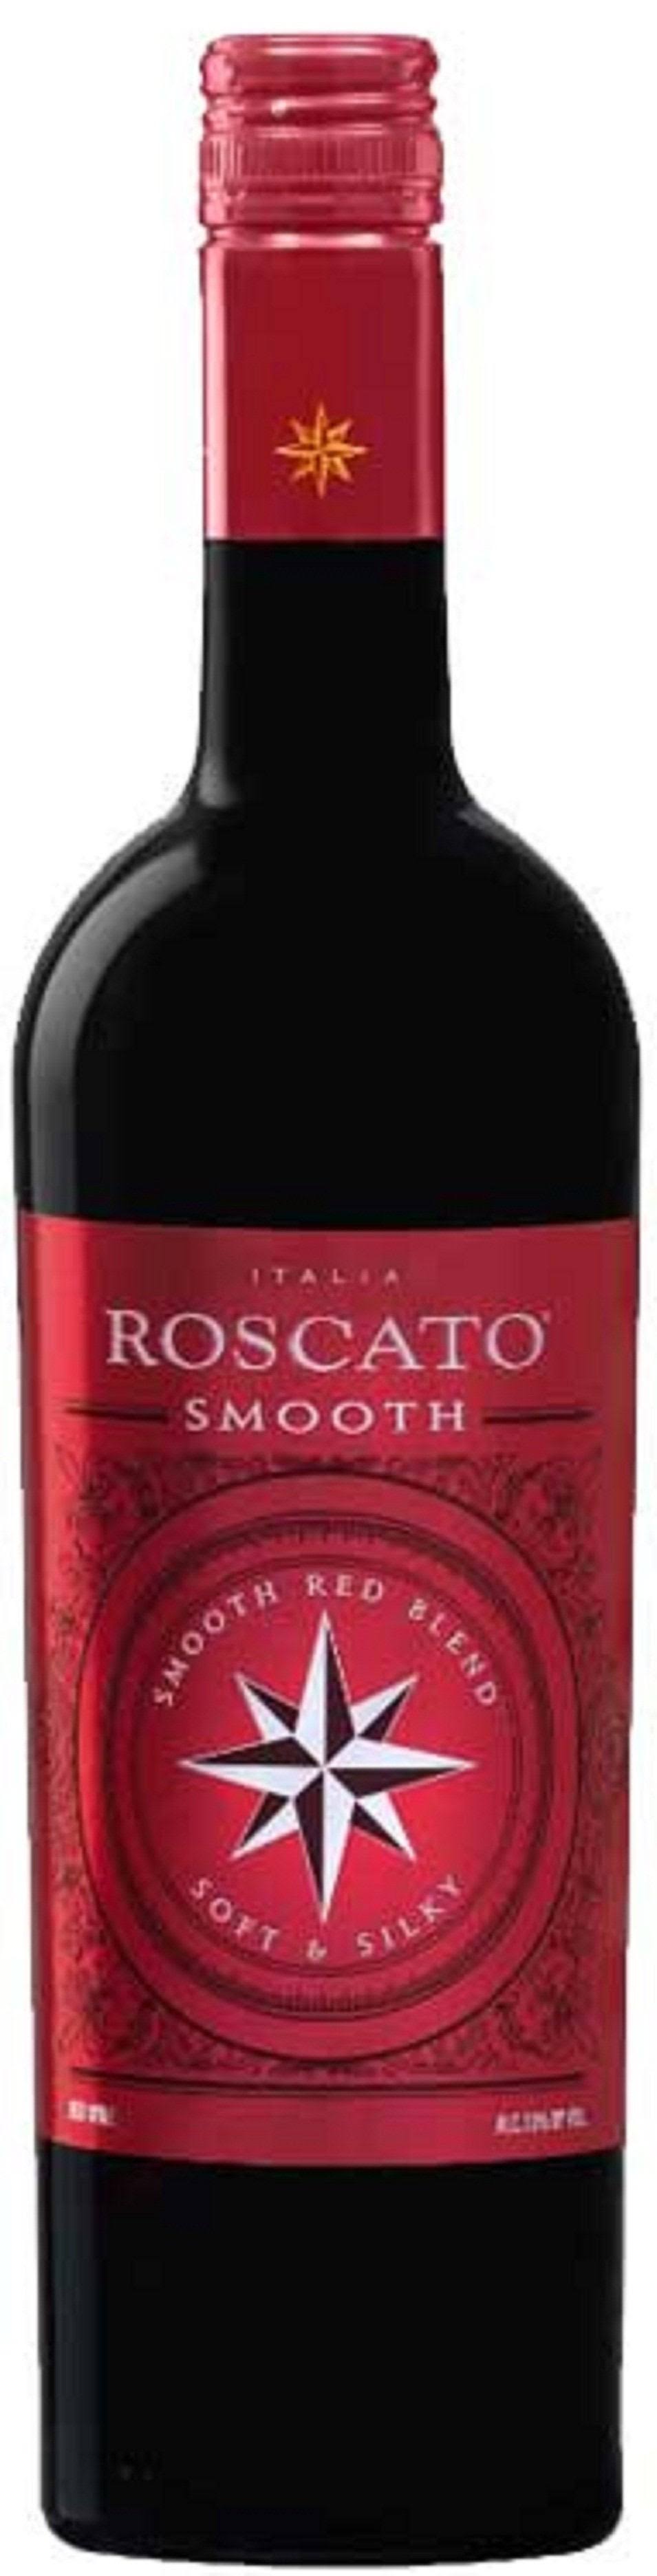 Roscato Red Wine, Smooth - 750 ml